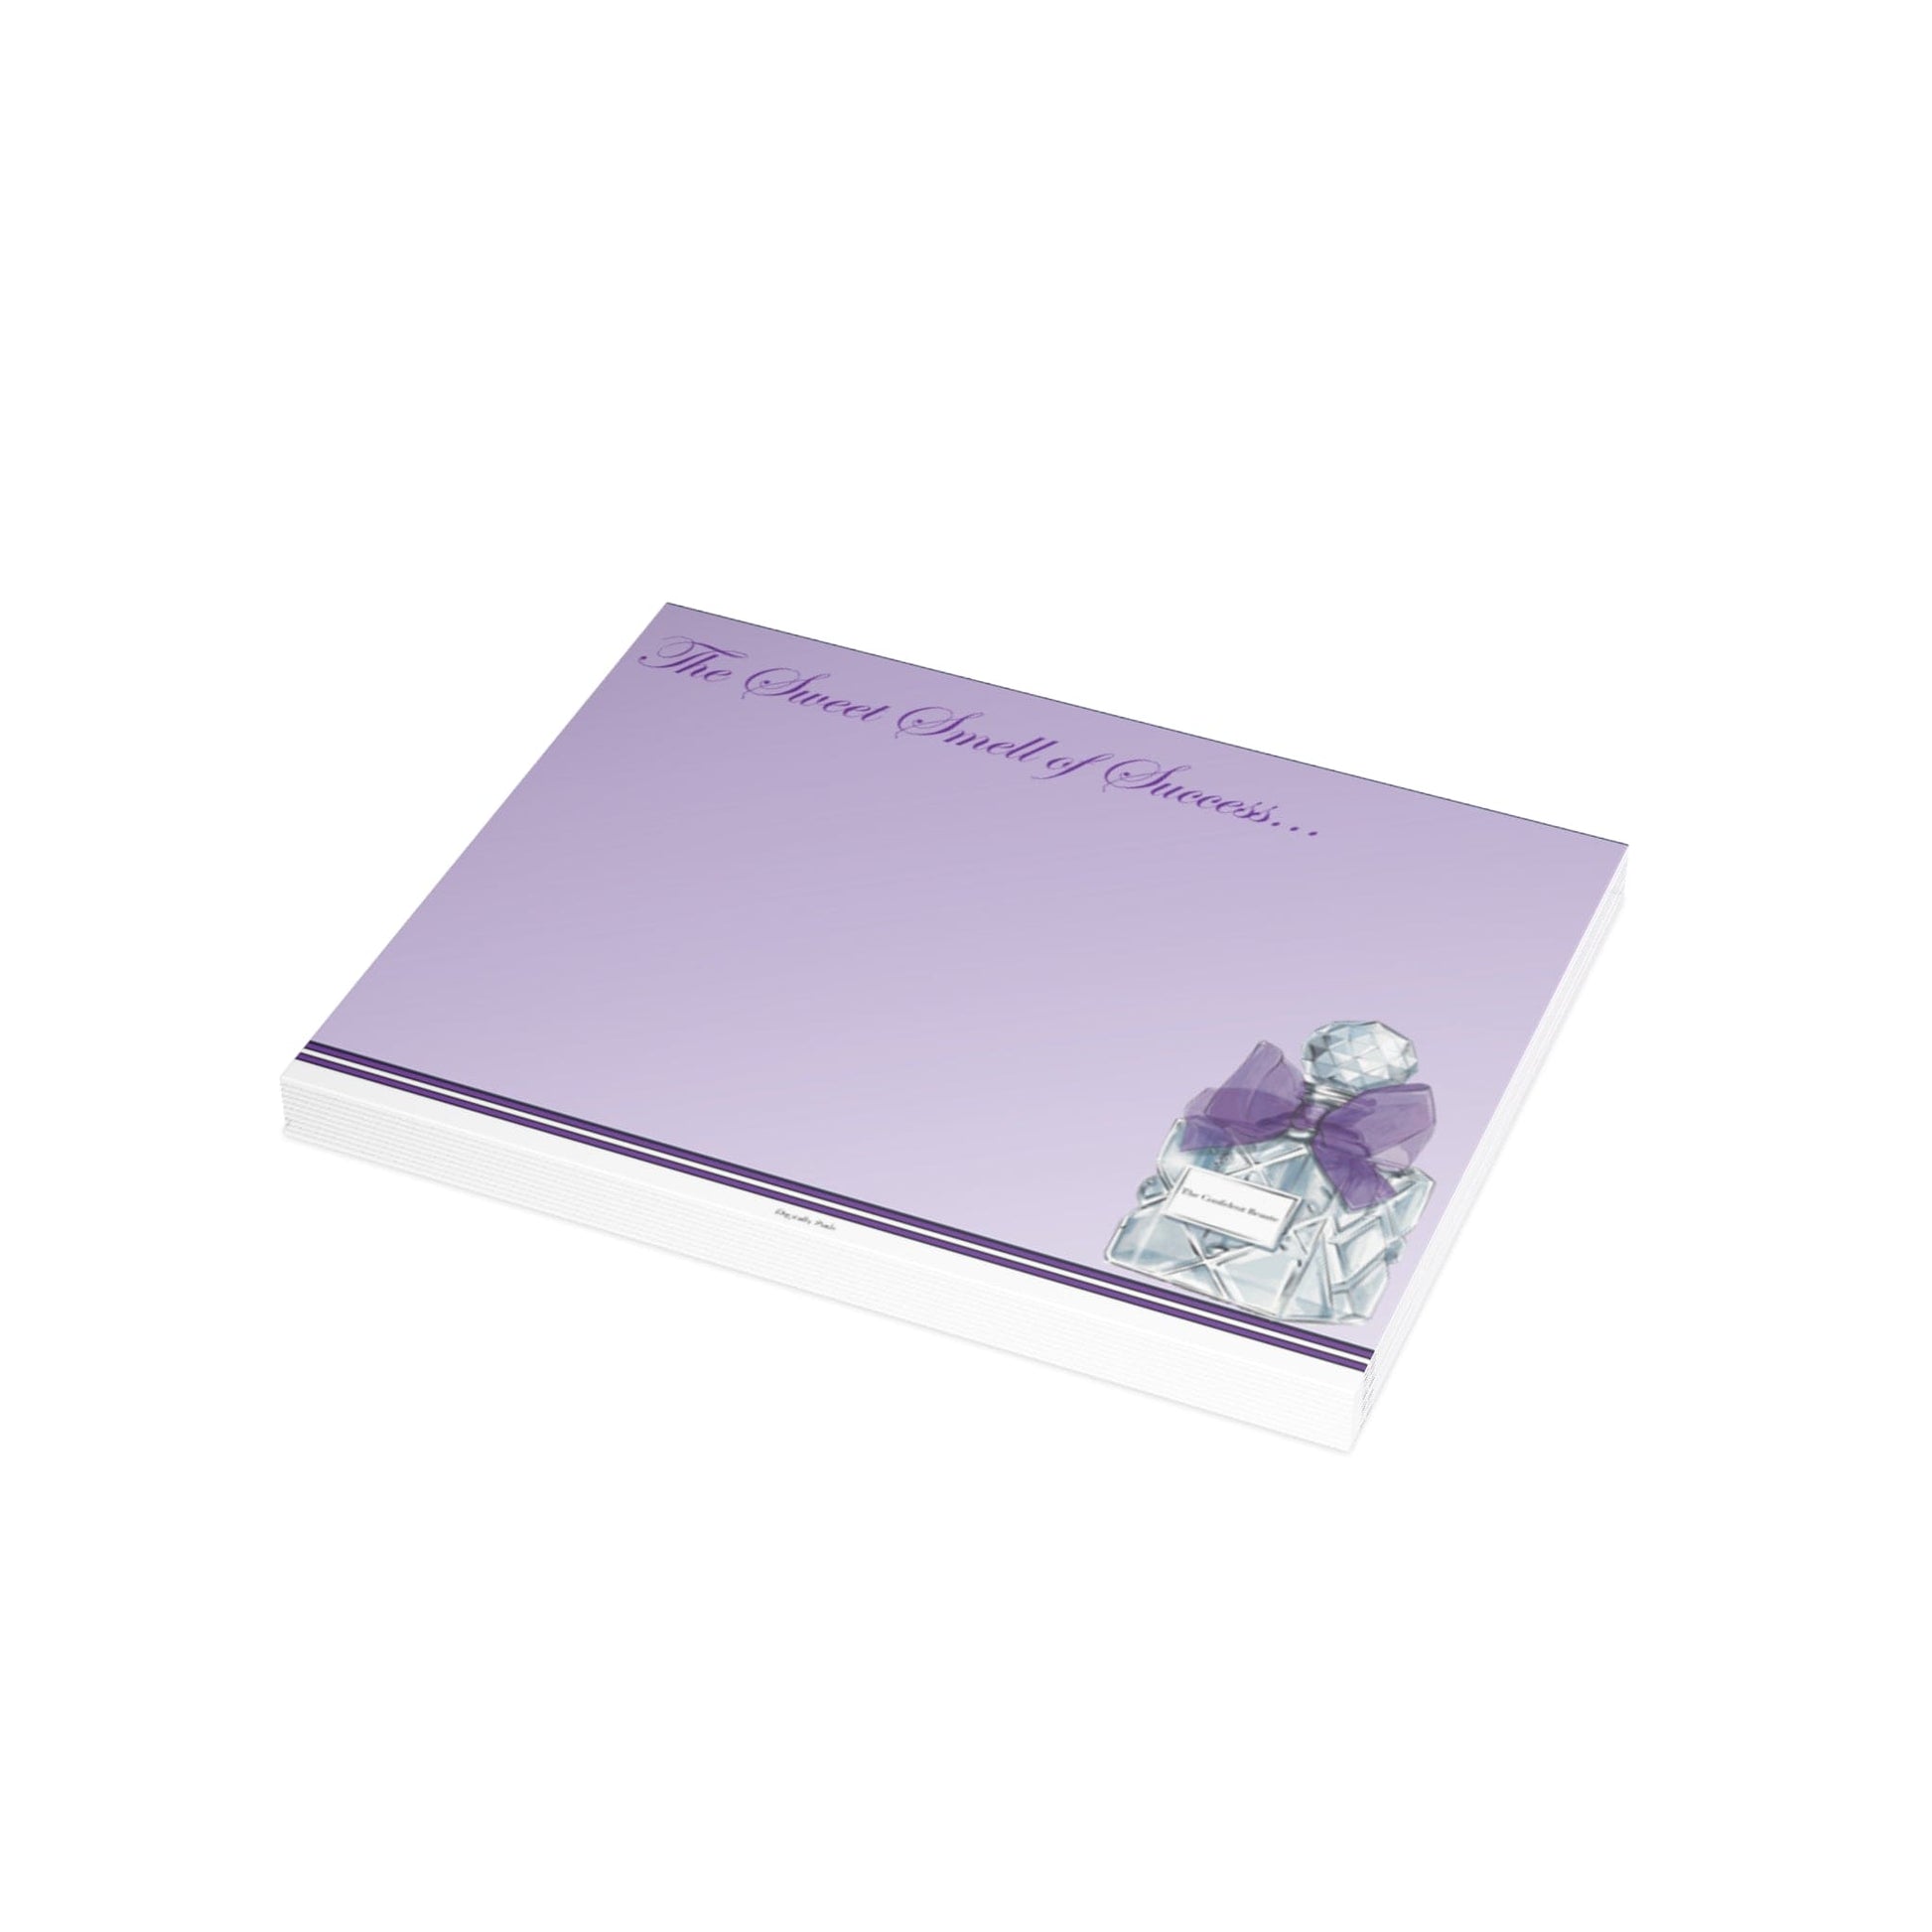 Personalized Note Card: Add a Personal Touch with Customized Stationery for Every Occasion